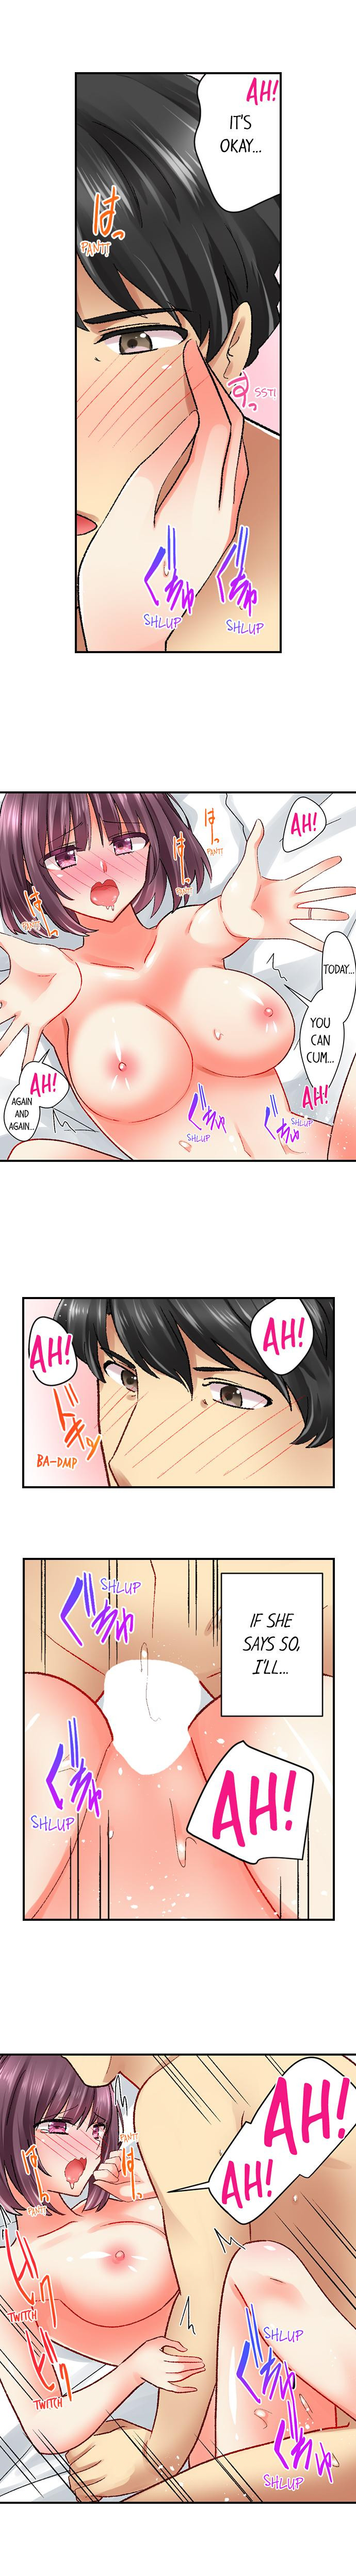 Our Kinky Newlywed Life - Chapter 45 Page 5